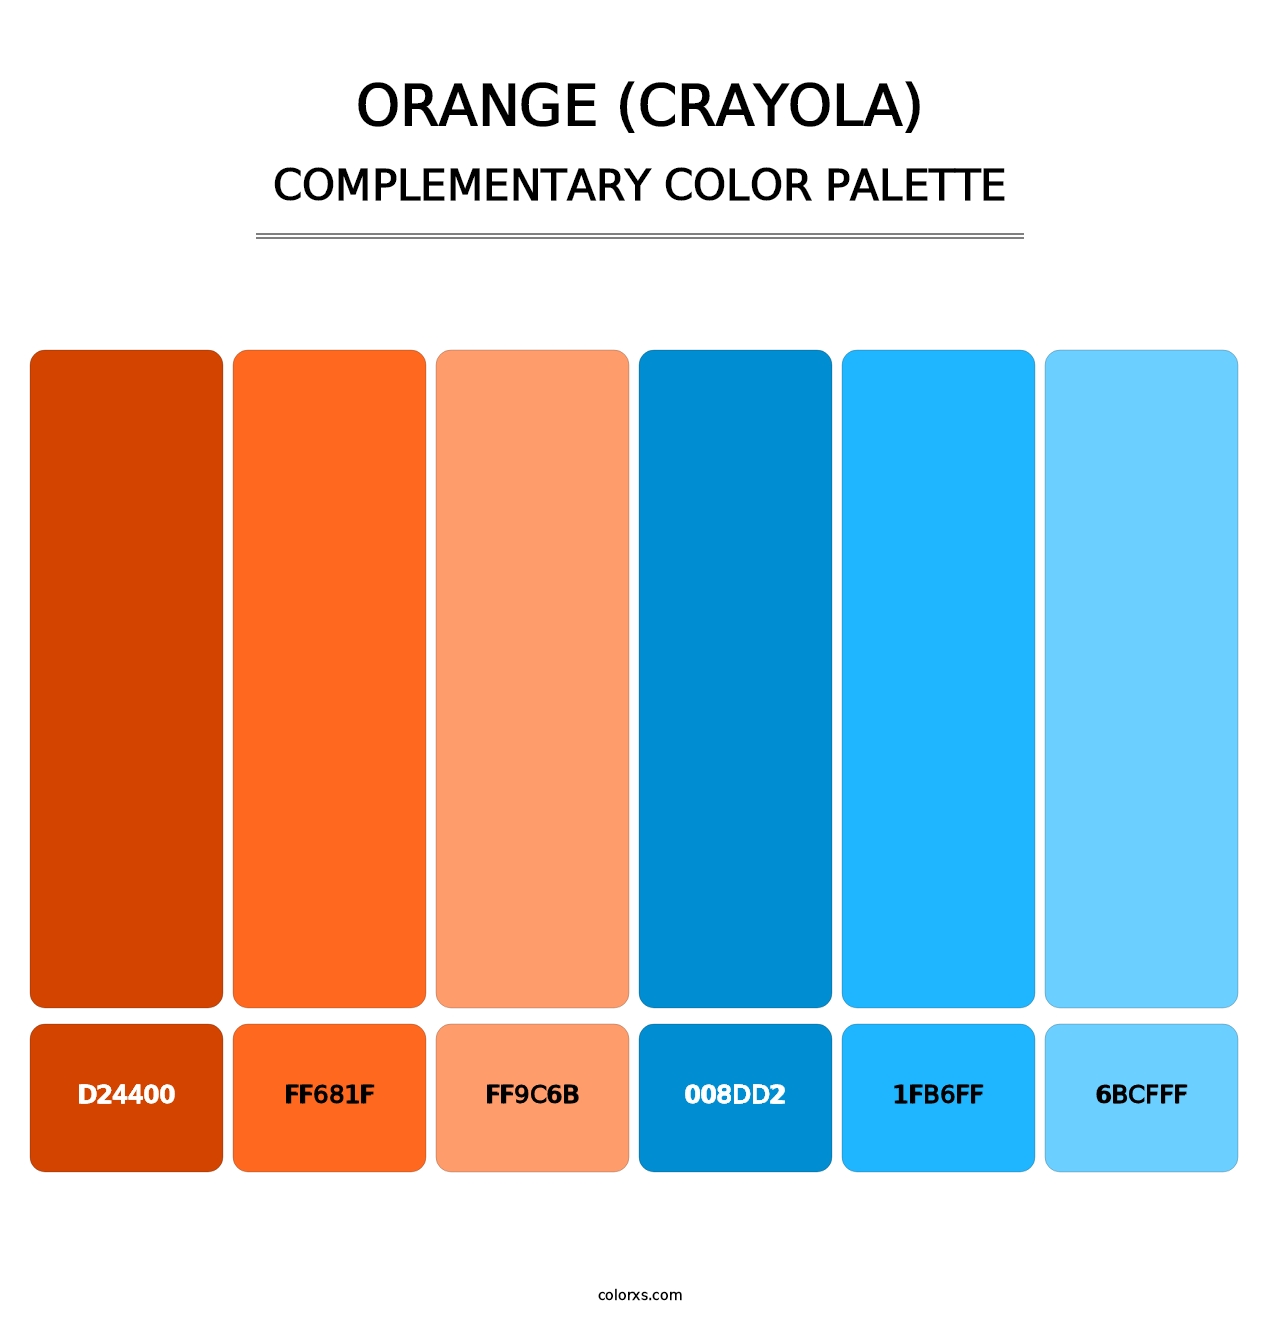 Orange (Crayola) - Complementary Color Palette